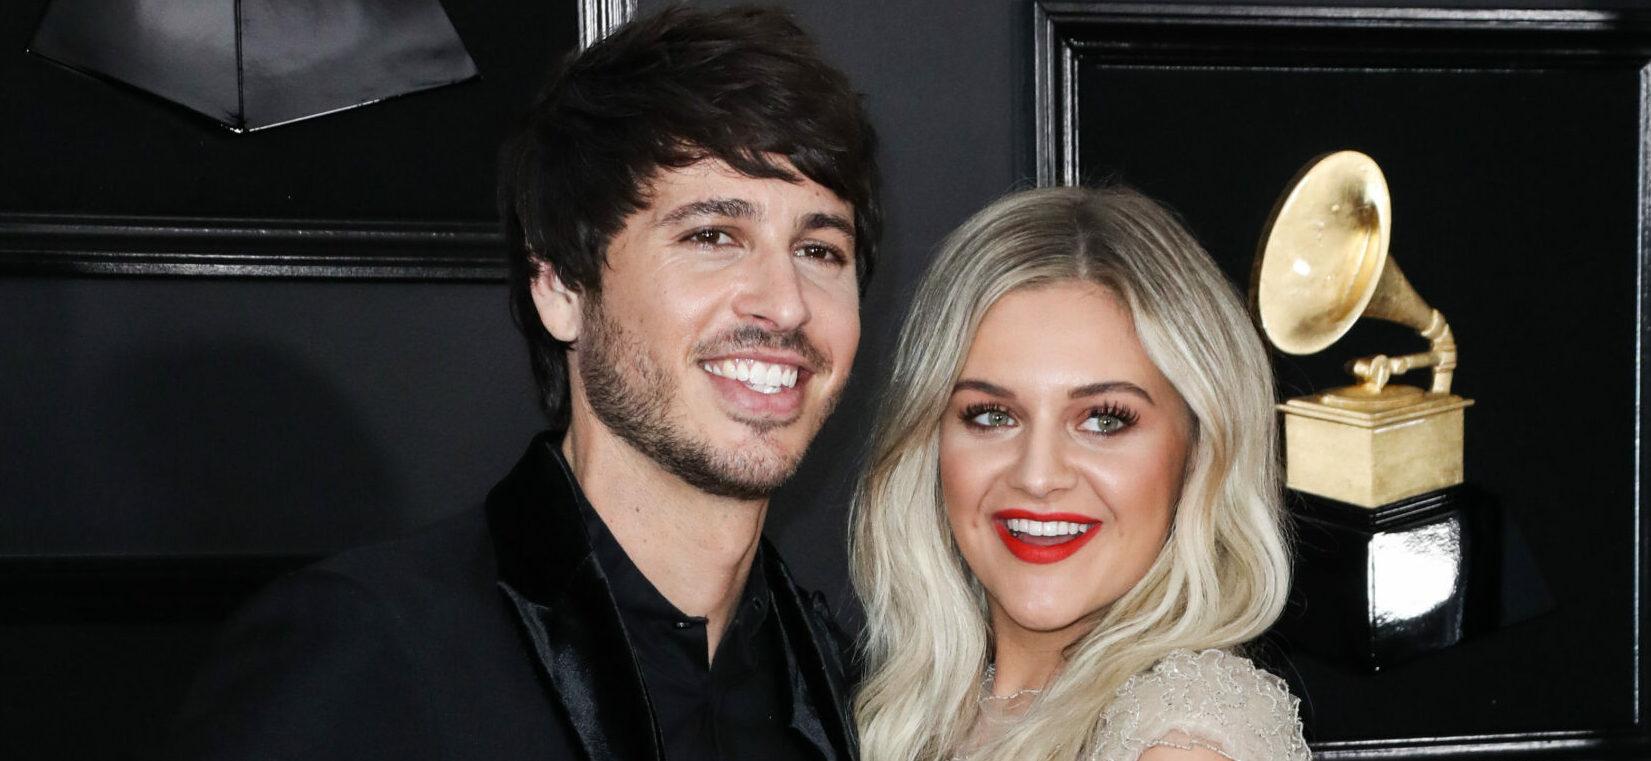 Kelsea Ballerini Unfollows Ex, Morgan Evans, On IG After Confirming Chase Stokes Romance